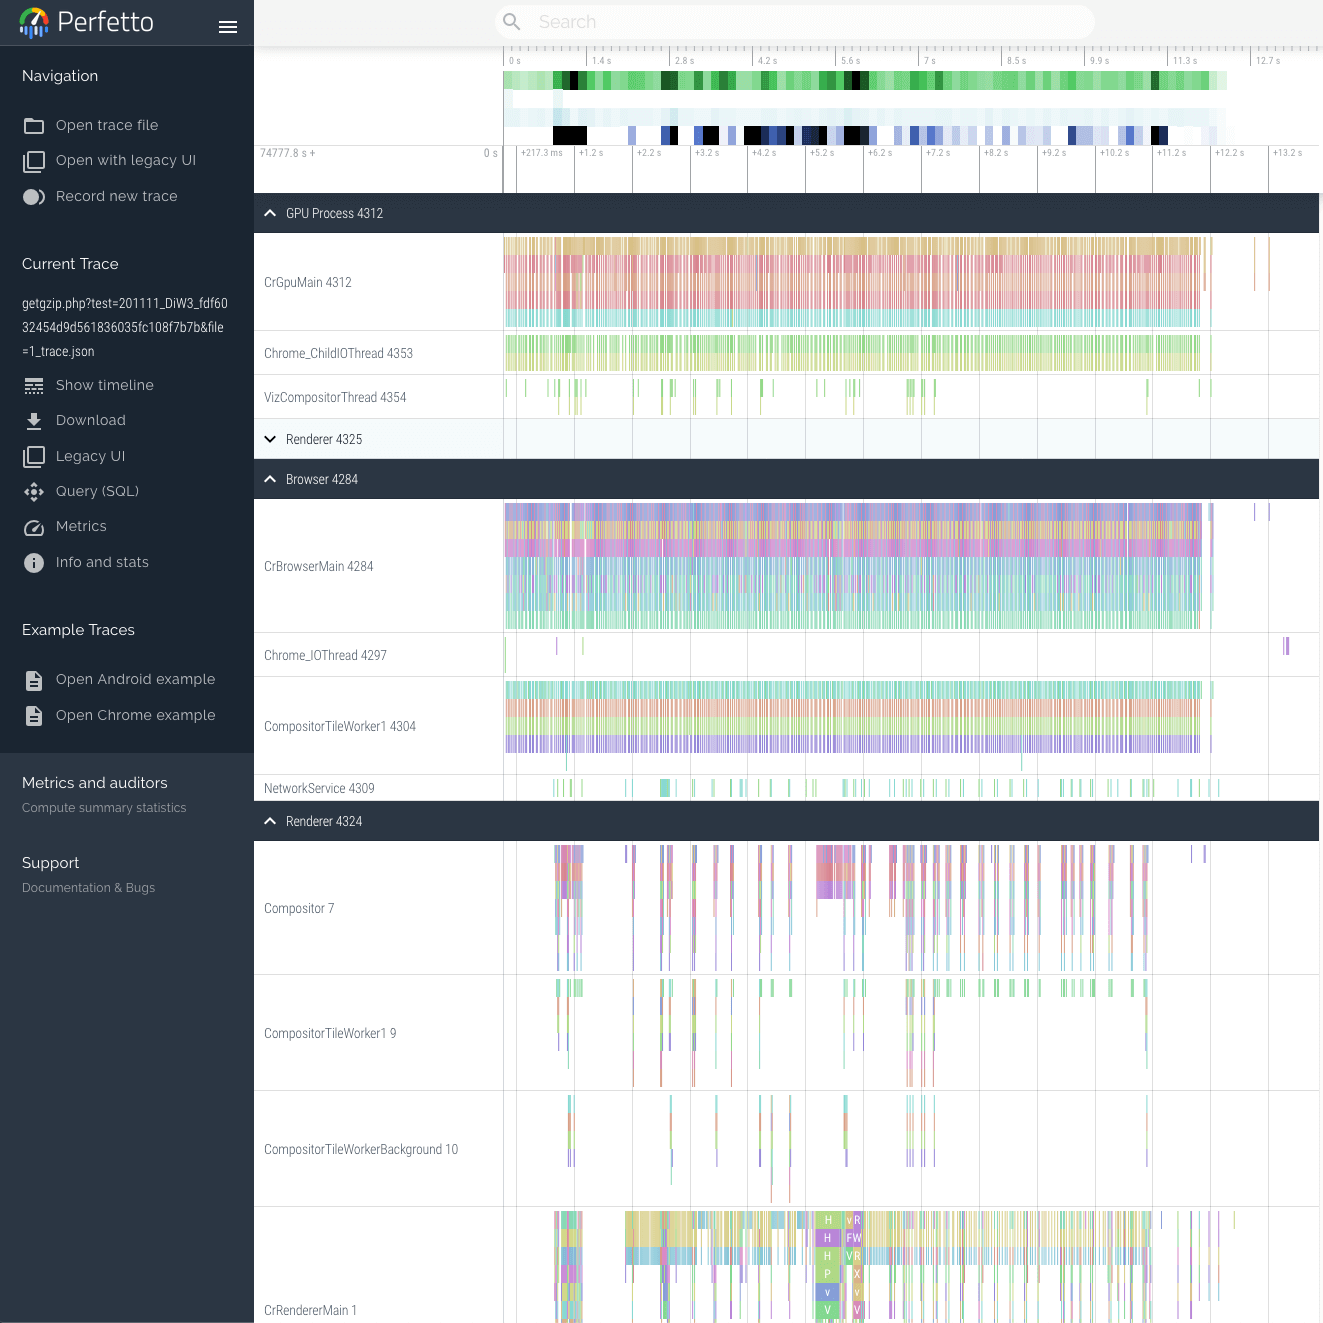 Perfetto can give you an insight into the underlying Chromium profile data if tracing is enabled in the test settings. Image shows a huge number of data points visualised across many different categories.